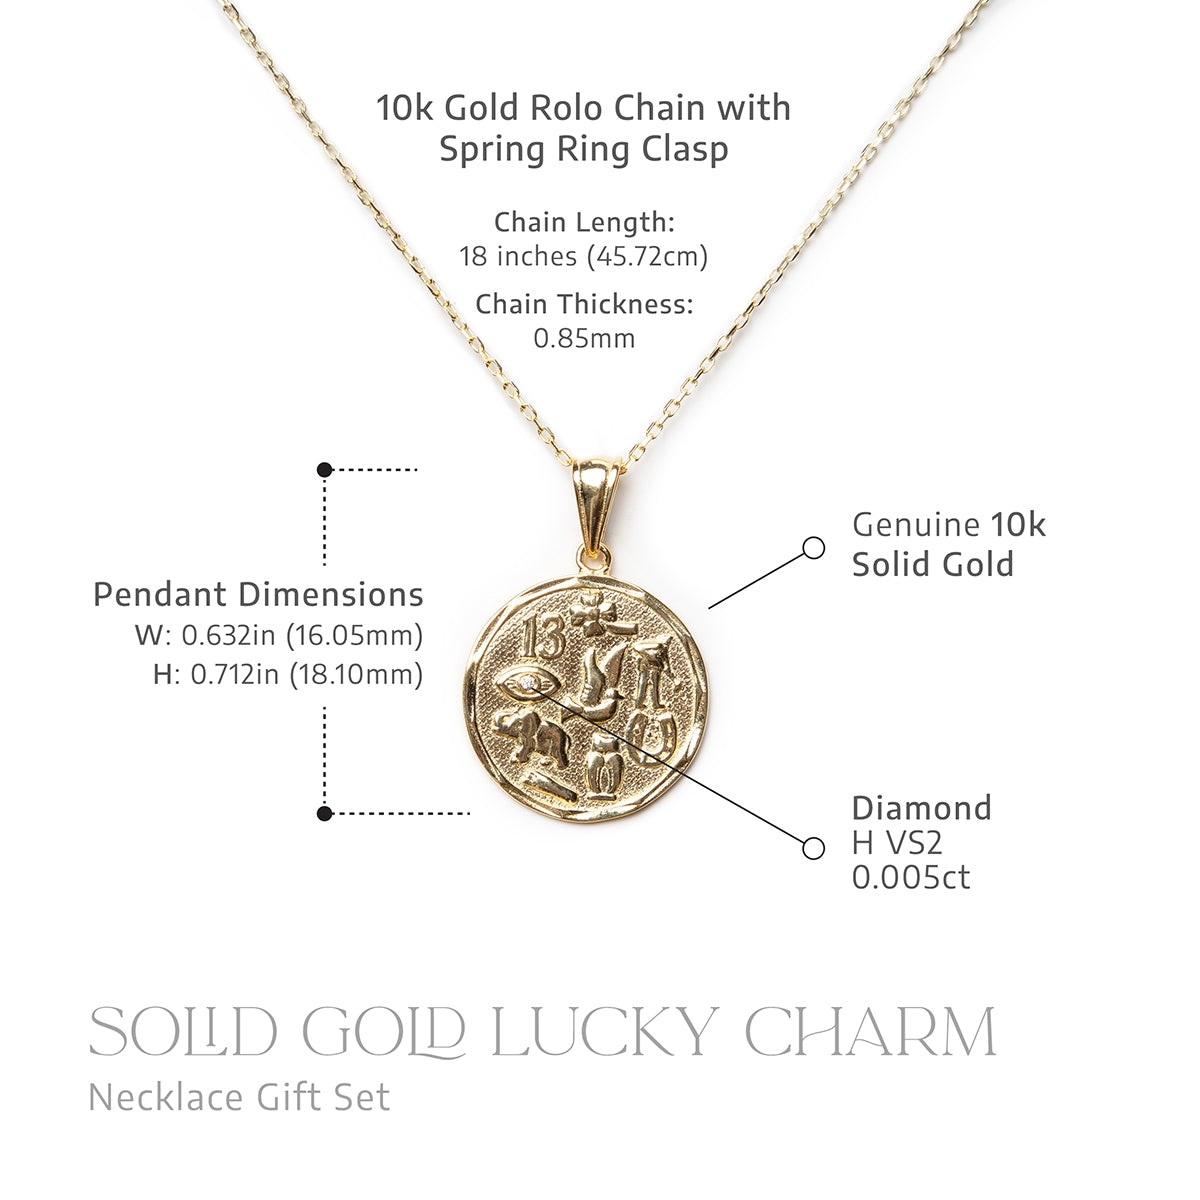 You Got This - Solid Gold Good Luck Charm Necklace Gift Set